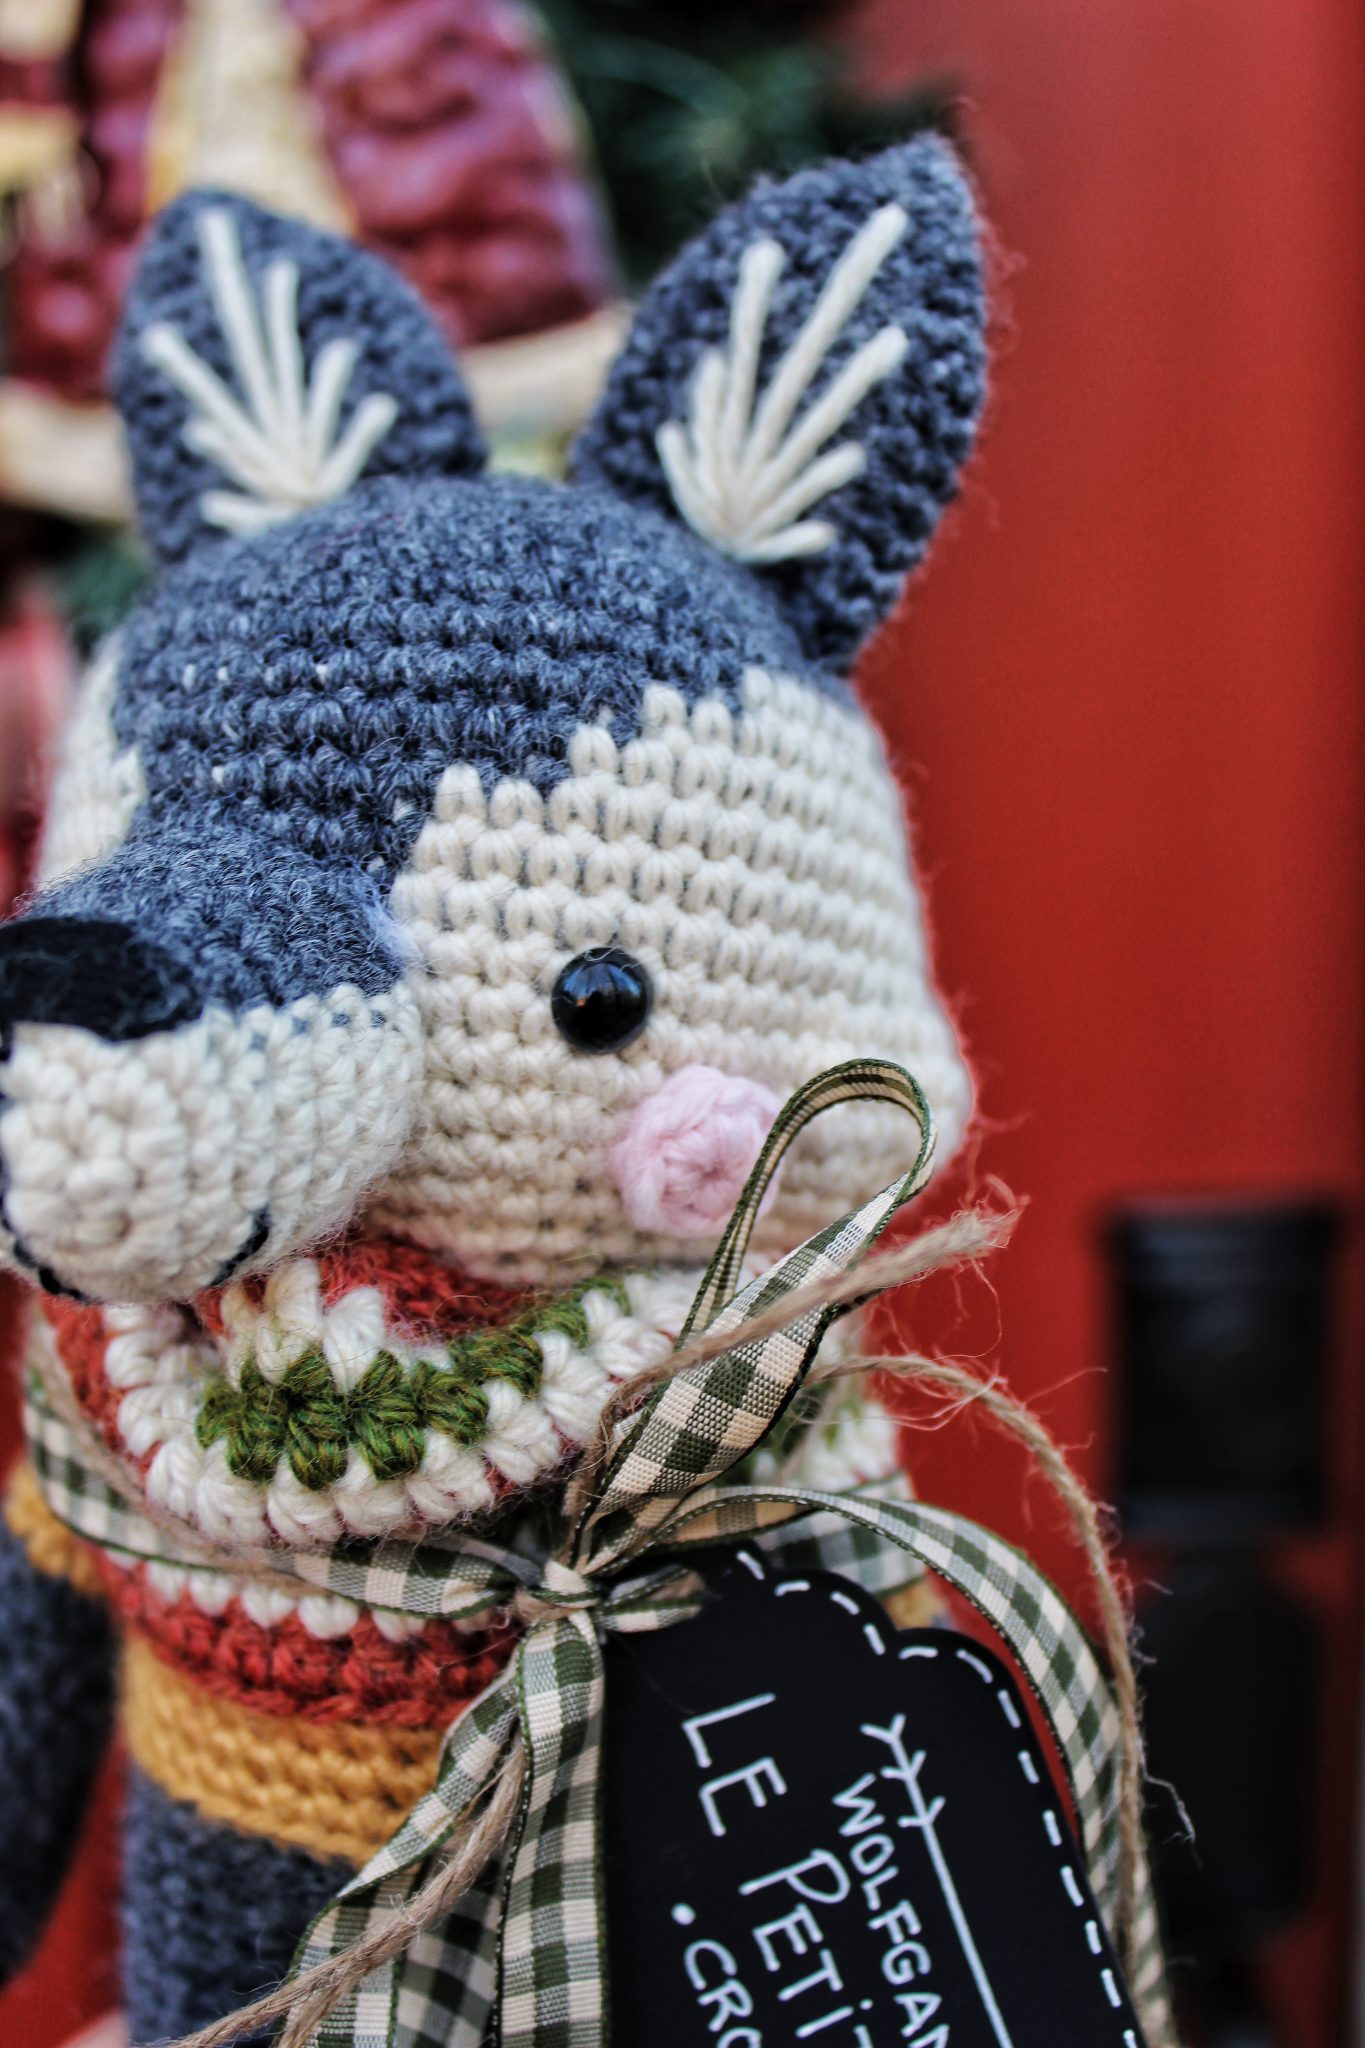 Making Amigurumi: The Artistry is in the Details